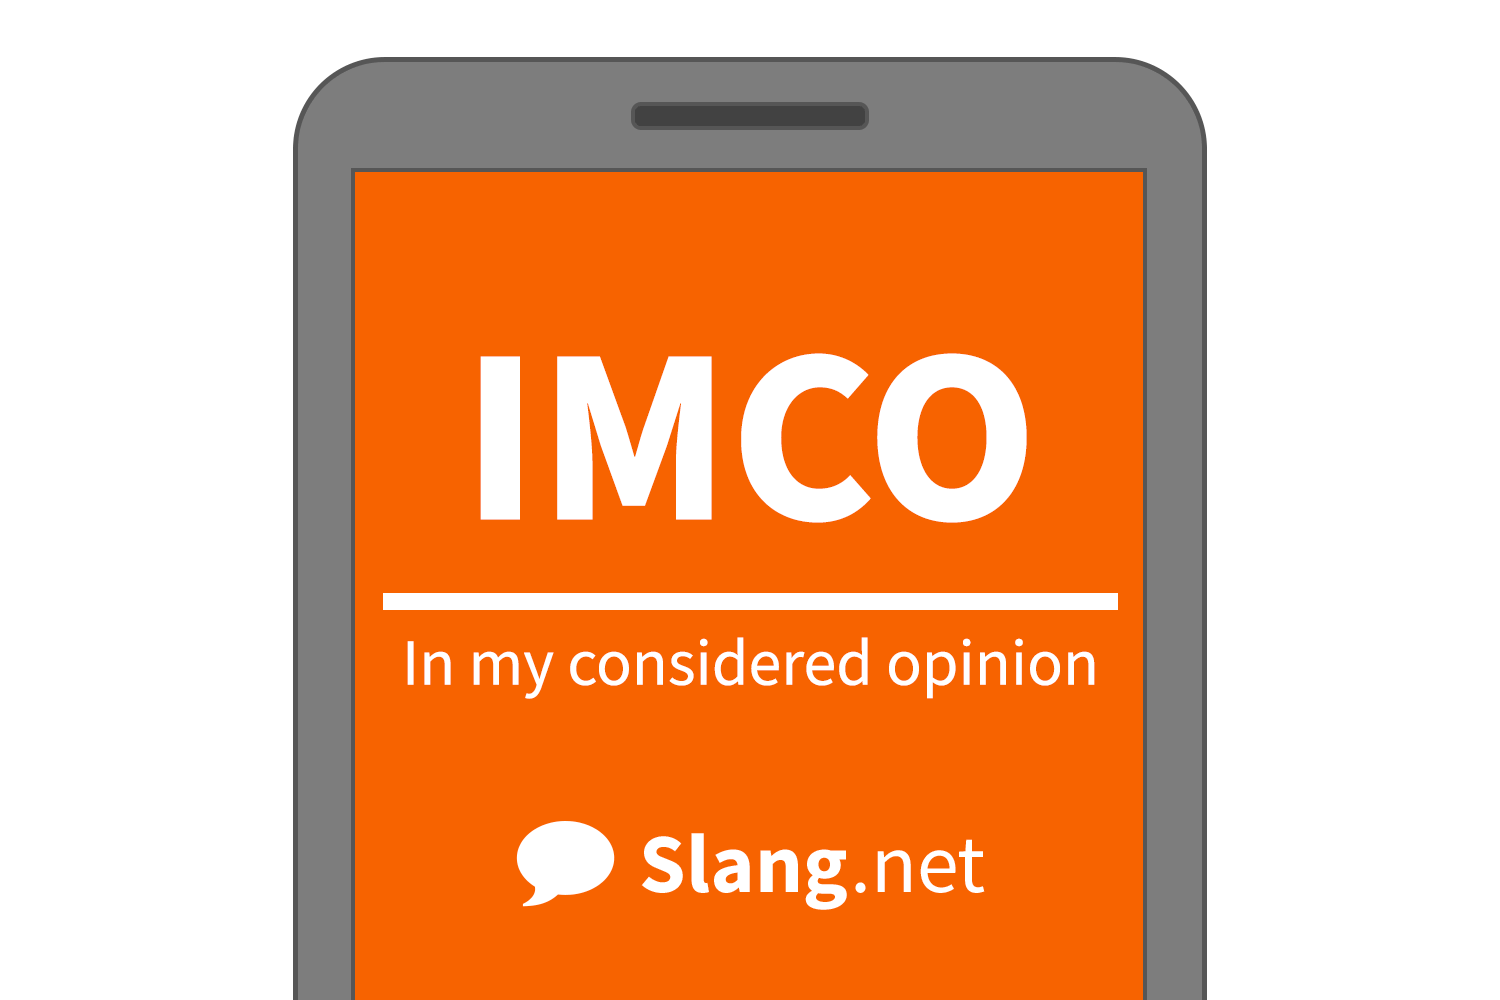 IMCO stands for &quot;in my considered opinion&quot;